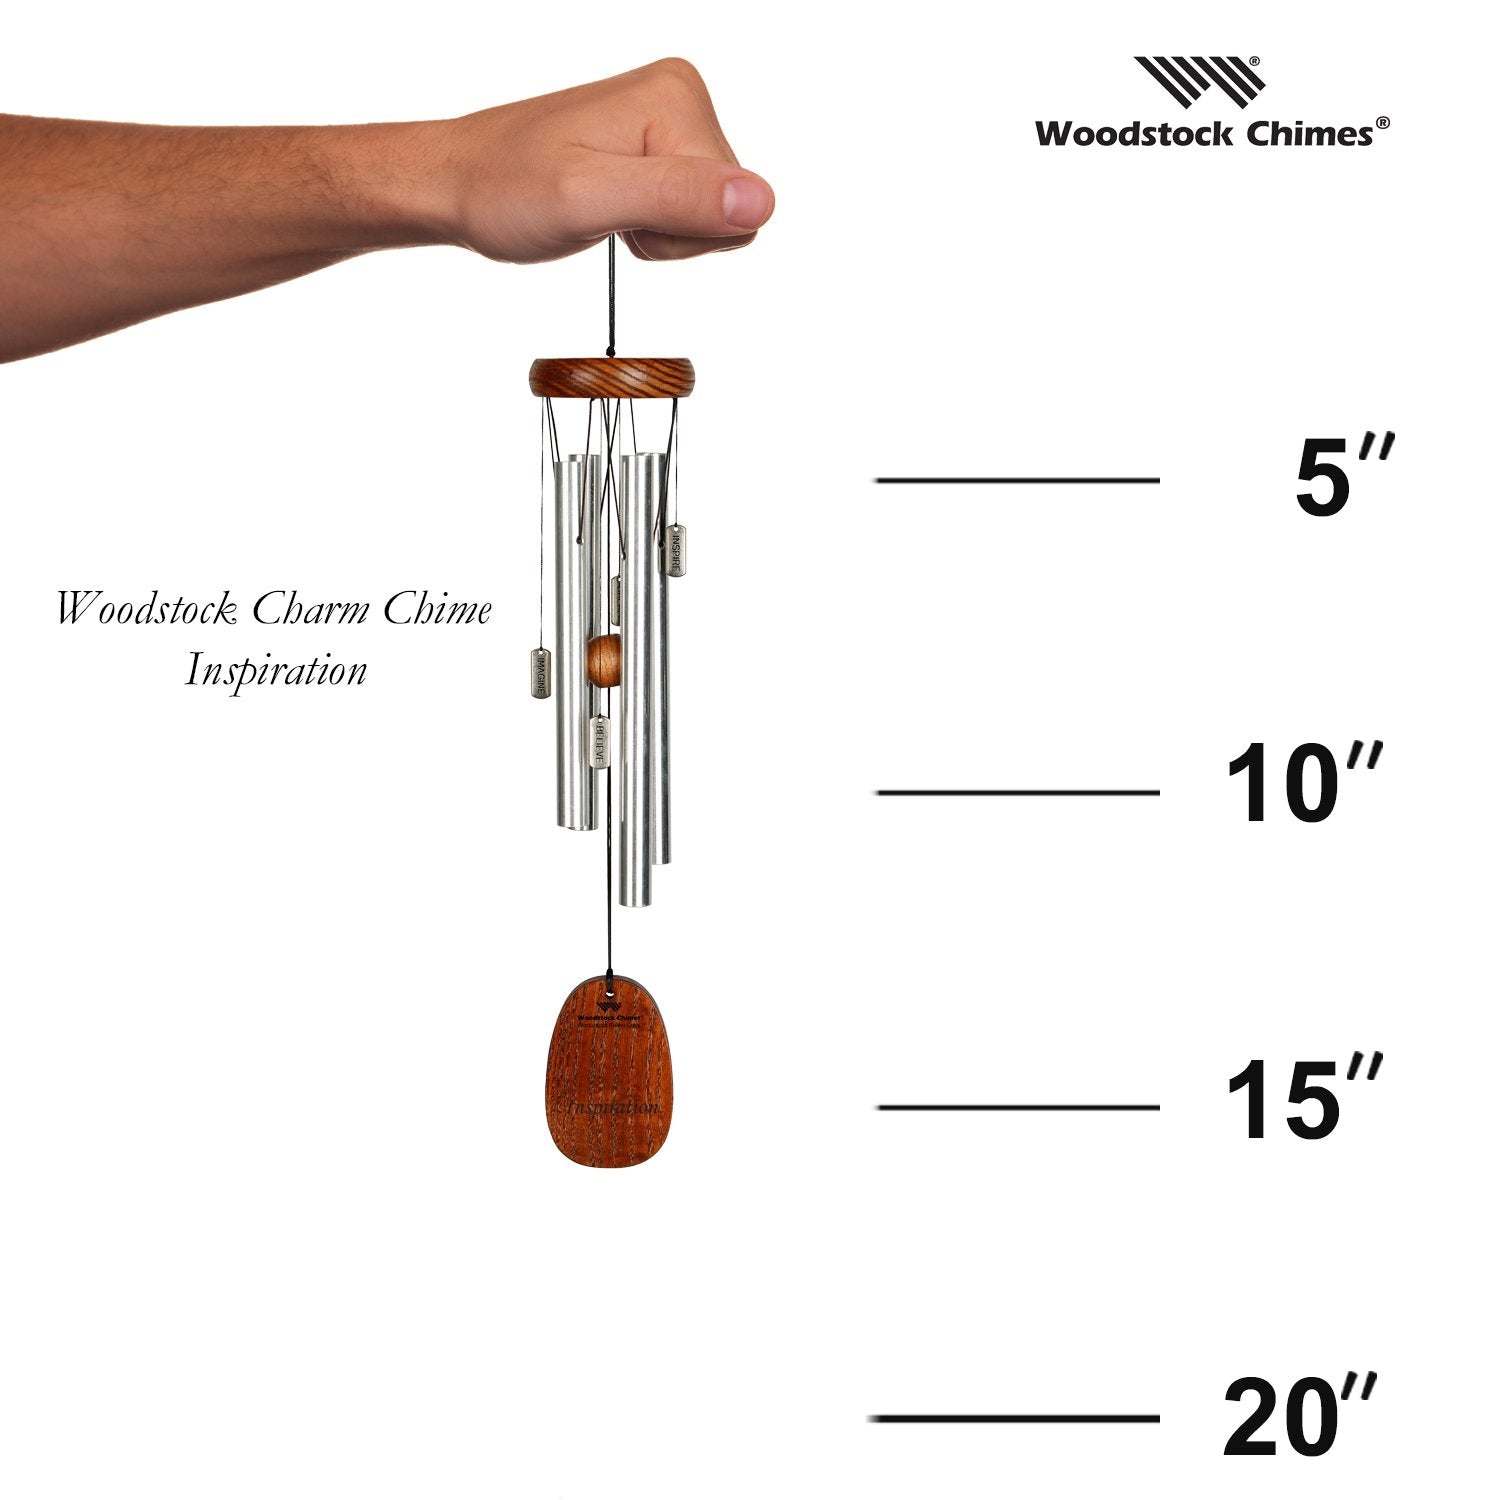 Woodstock Charm Chime - Inspiration proportion image